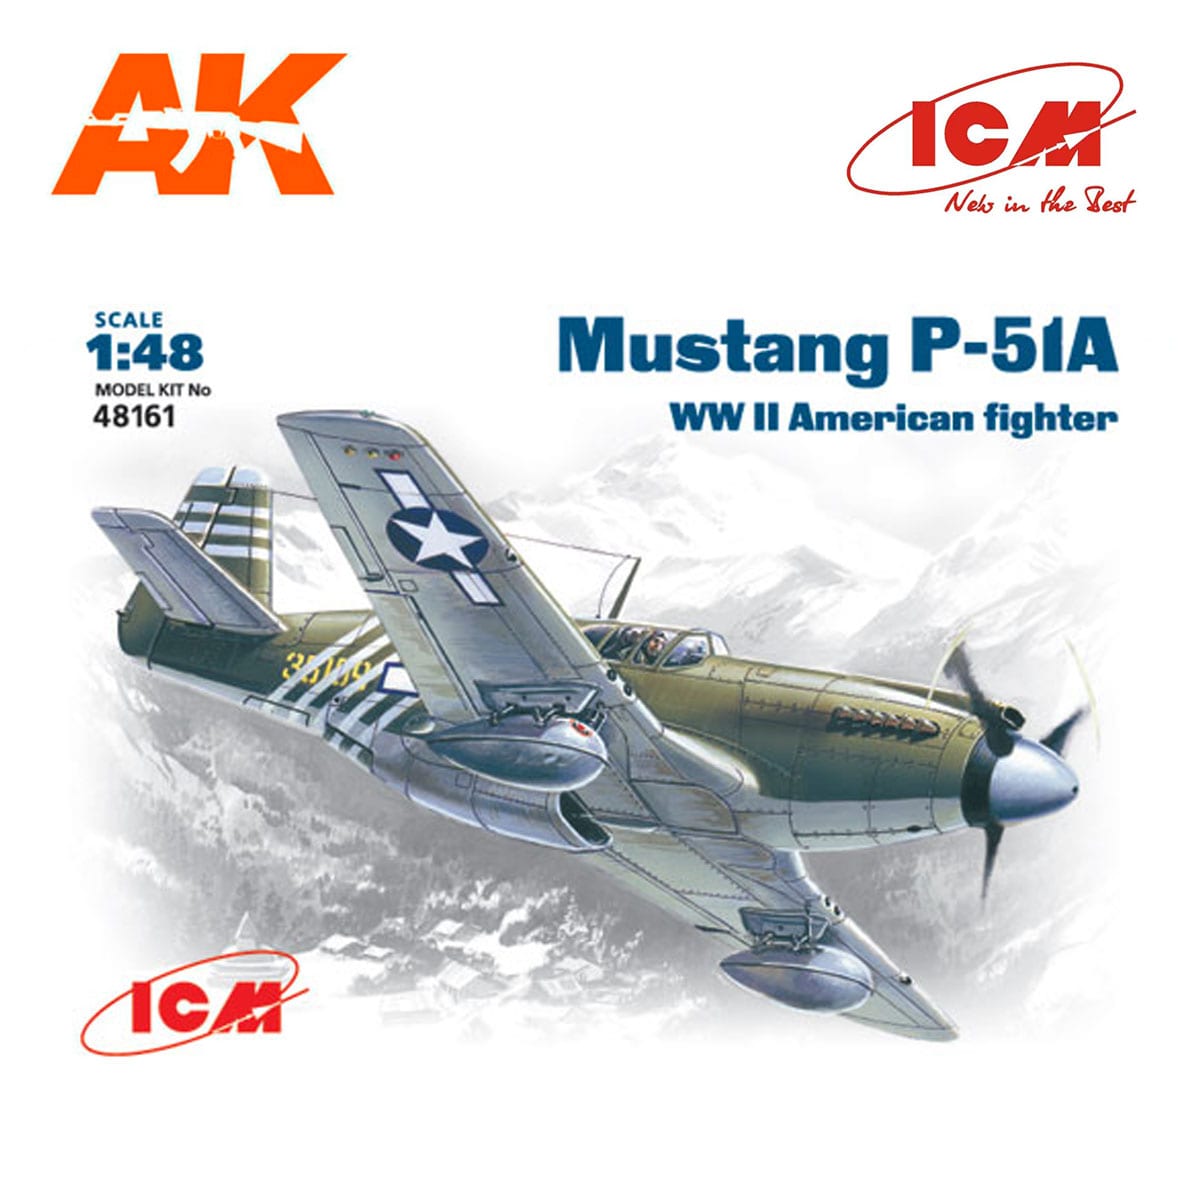 Mustang P-51A, WWII American Fighter 1/48